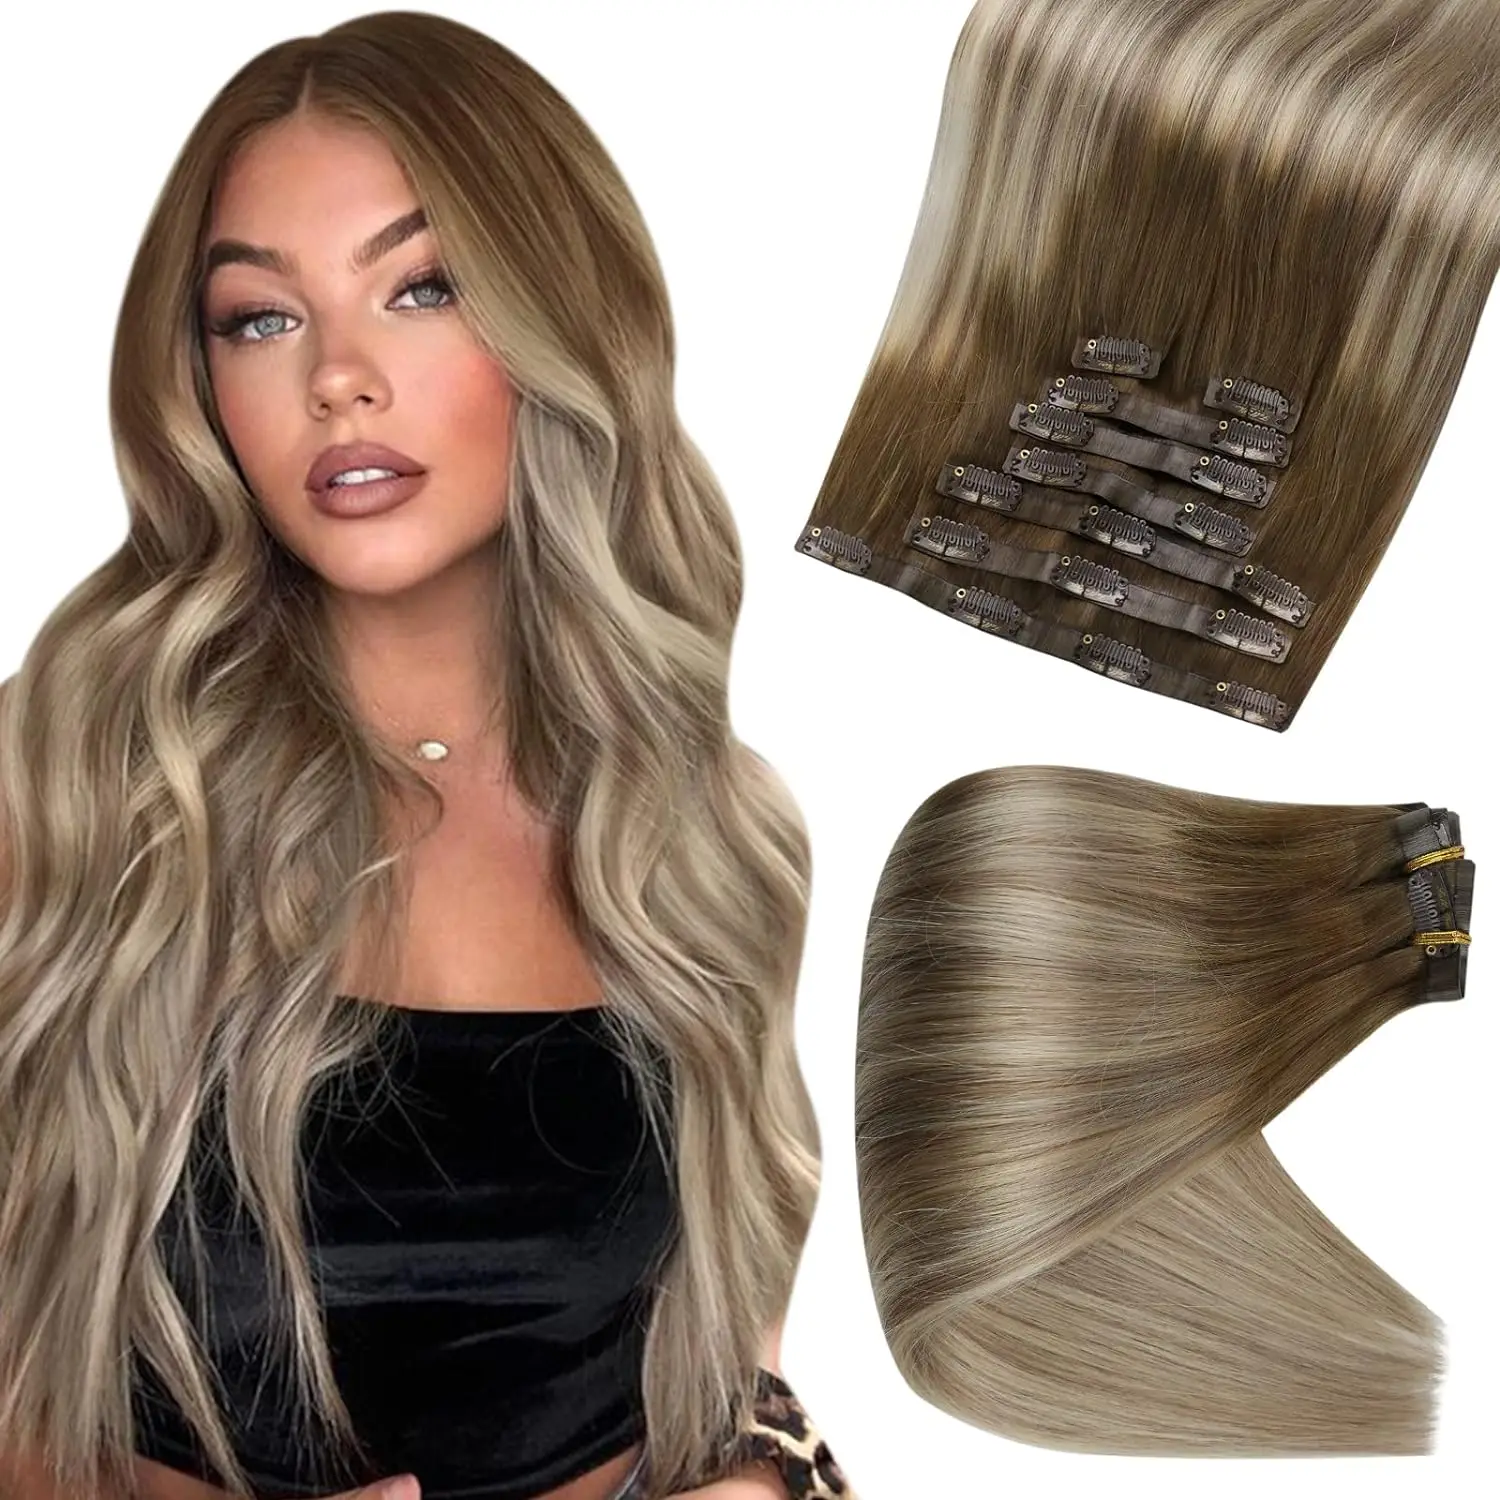 full-shine-clip-in-hair-extensions-human-hair-seamless-remy-hair-120g-pu-invisible-clip-in-human-hair-extensions-balayage-color